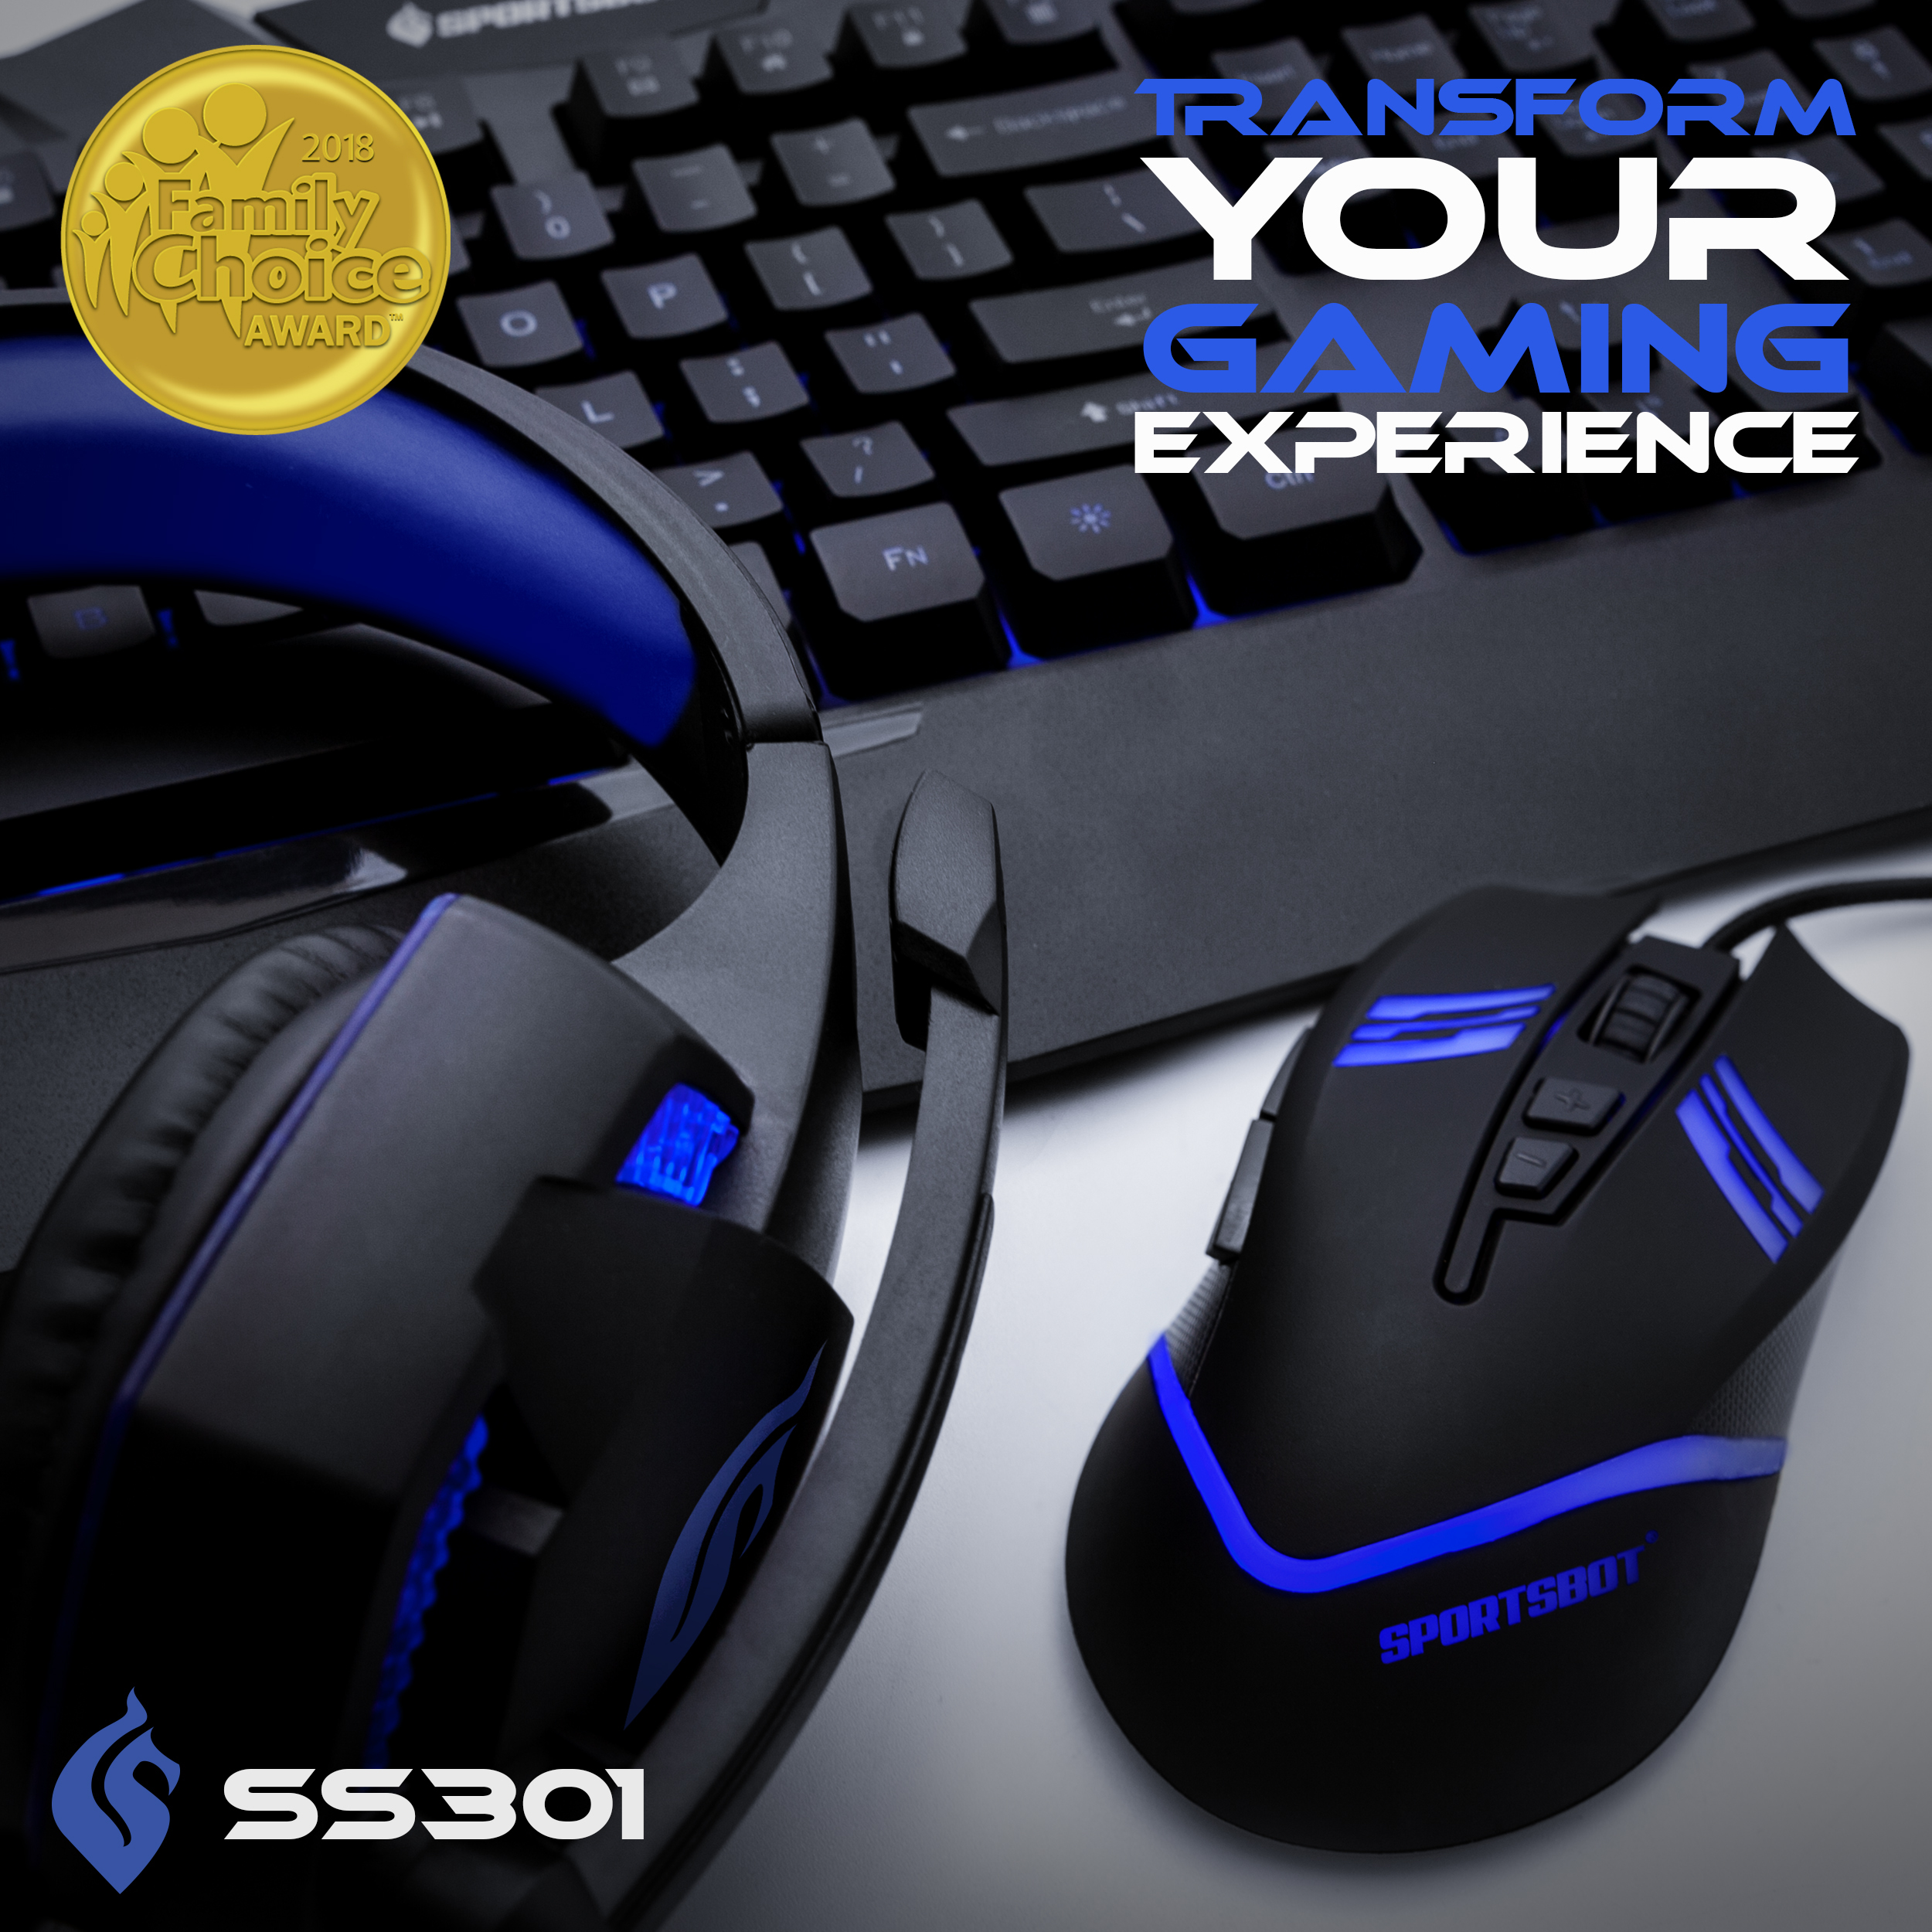 Sportsbot SS301 Blue LED Gaming Over-Ear Headset, Keyboard & Mouse Combo Set - image 2 of 10